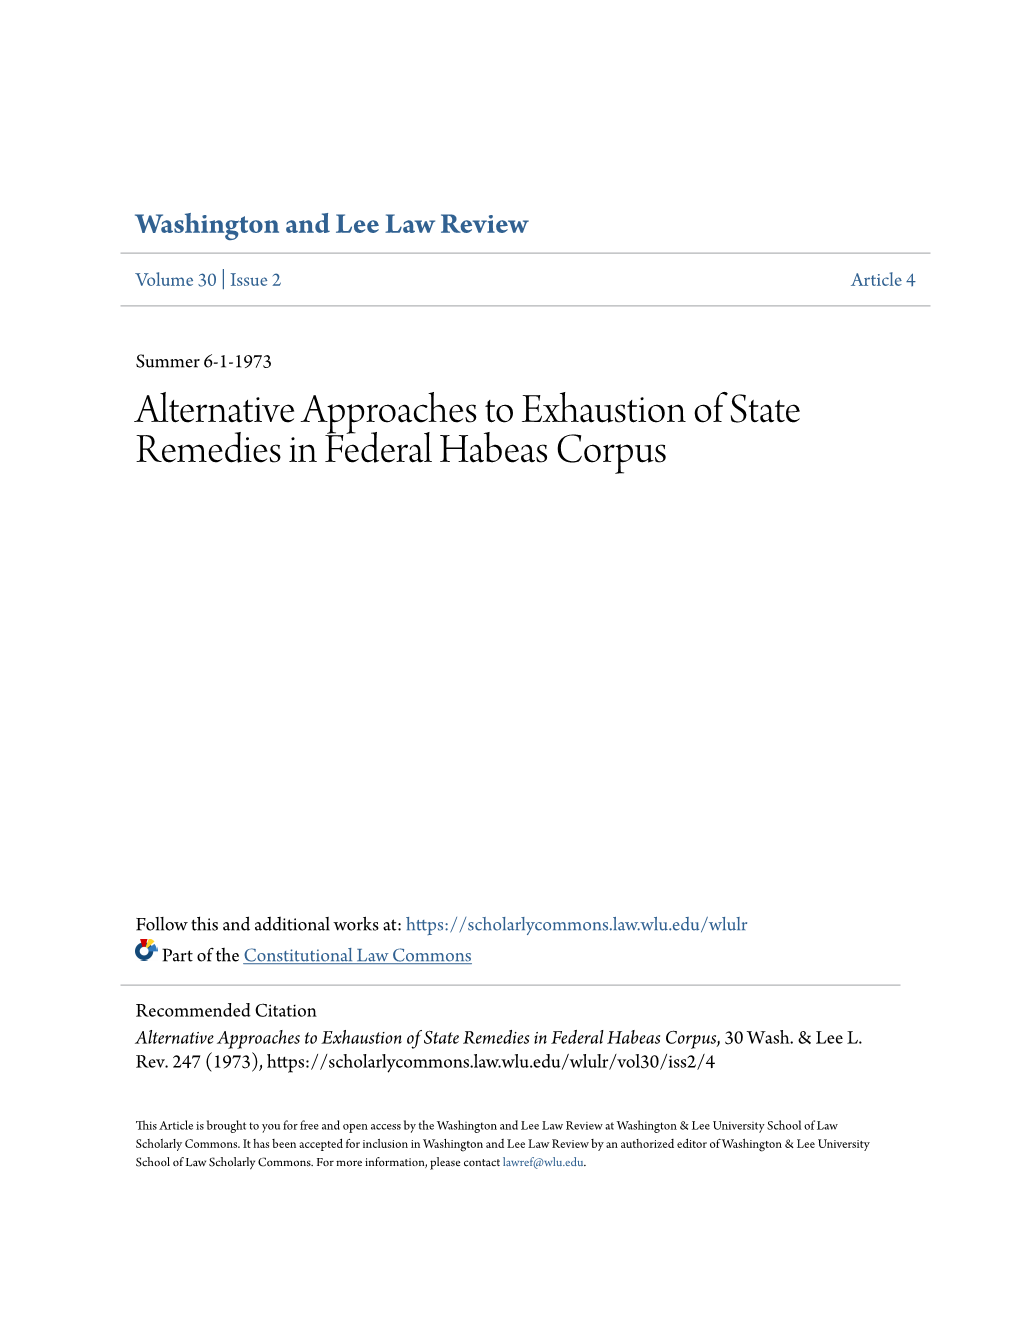 Alternative Approaches to Exhaustion of State Remedies in Federal Habeas Corpus